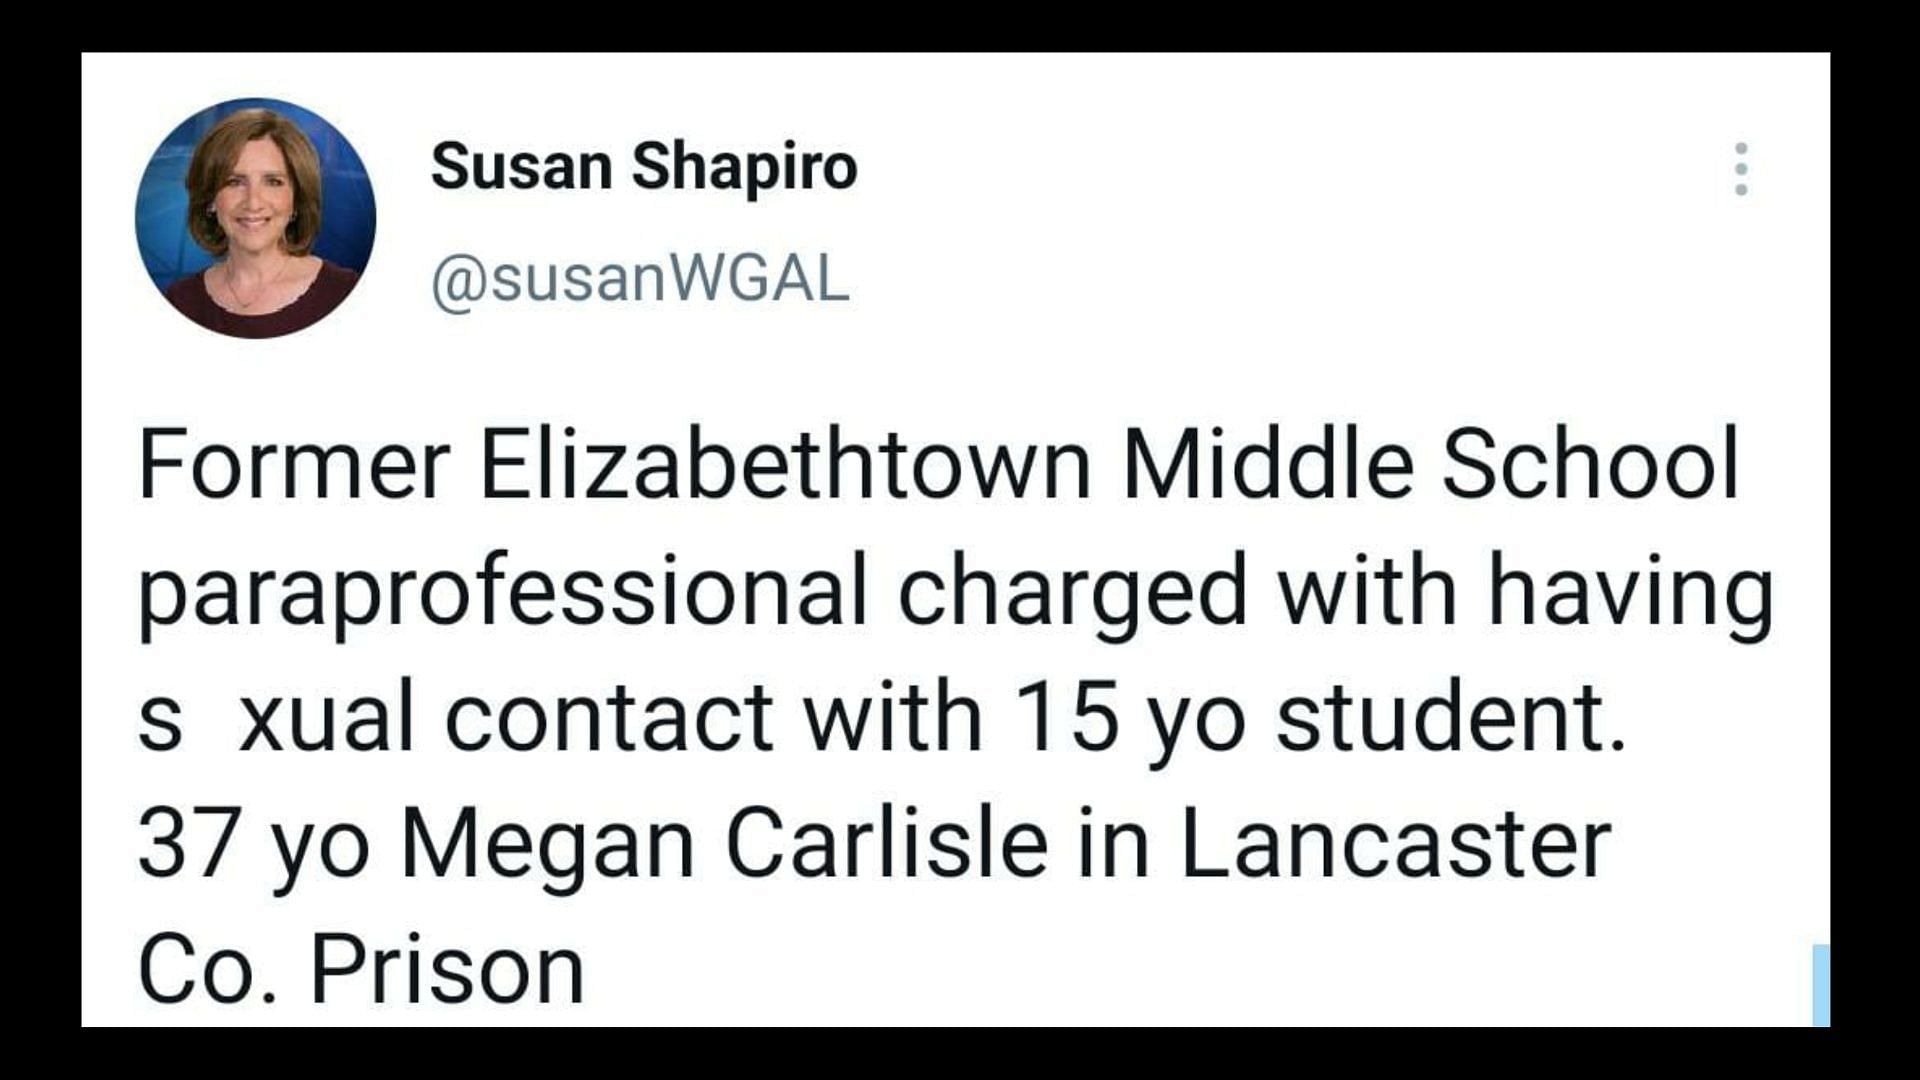 Carlisle allegedly sent explicit images and video of herself to the 15-year-old student, (Image via Susan Shapiro/Twitter)